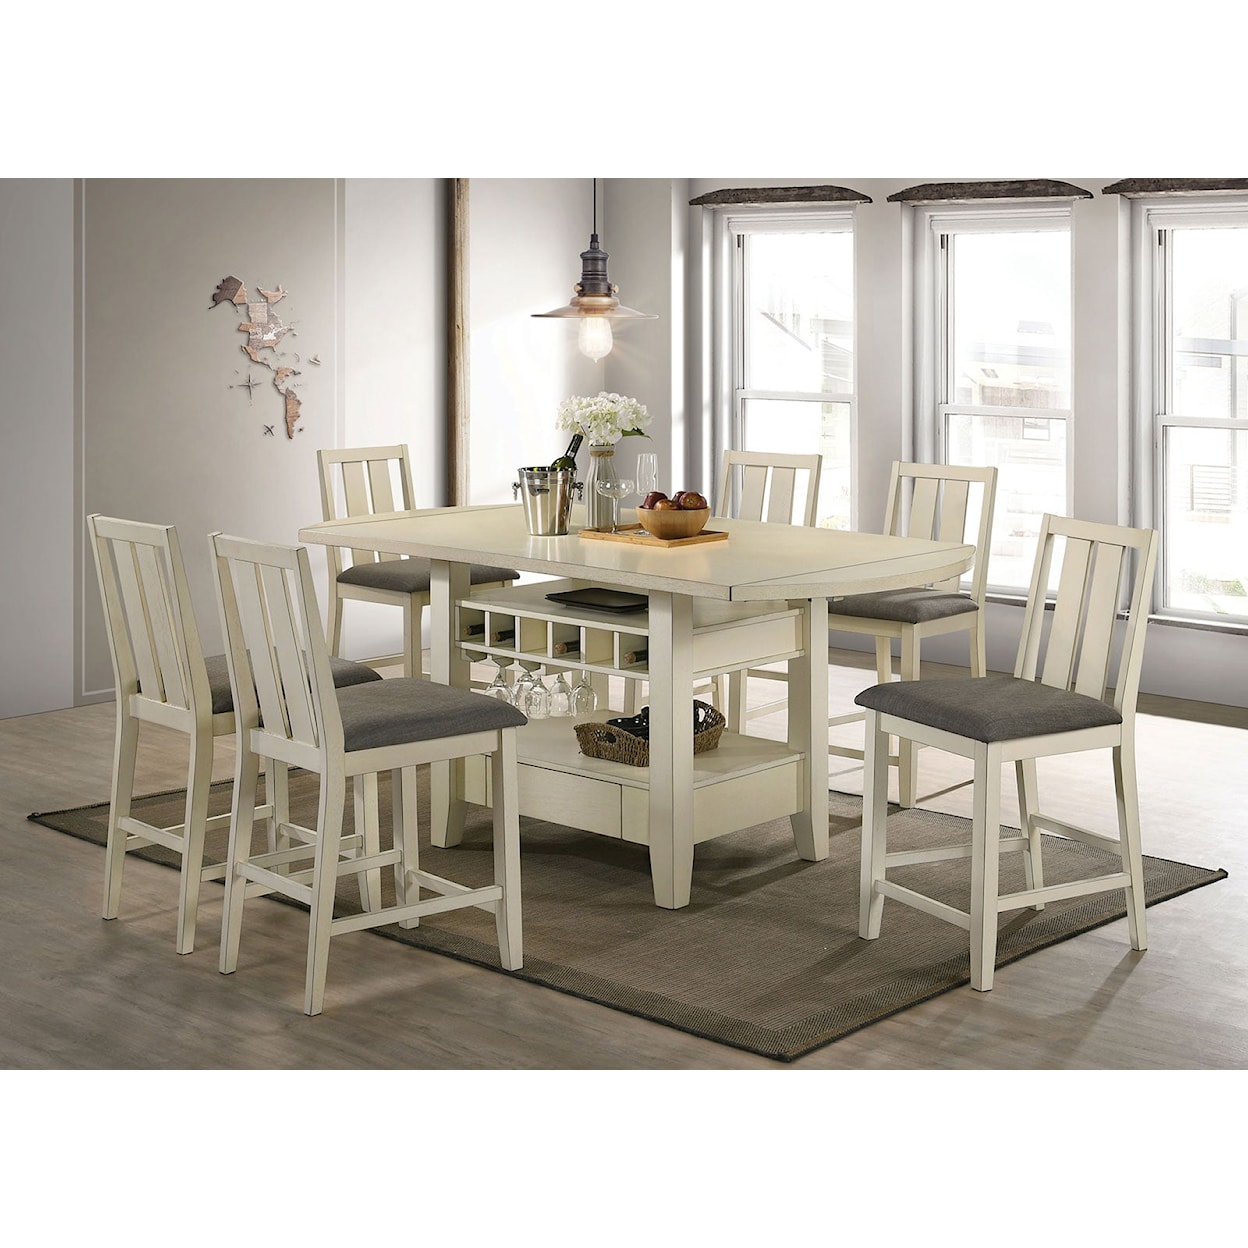 Furniture of America WILSONVILLE 7-Piece Counter Height Dining Set